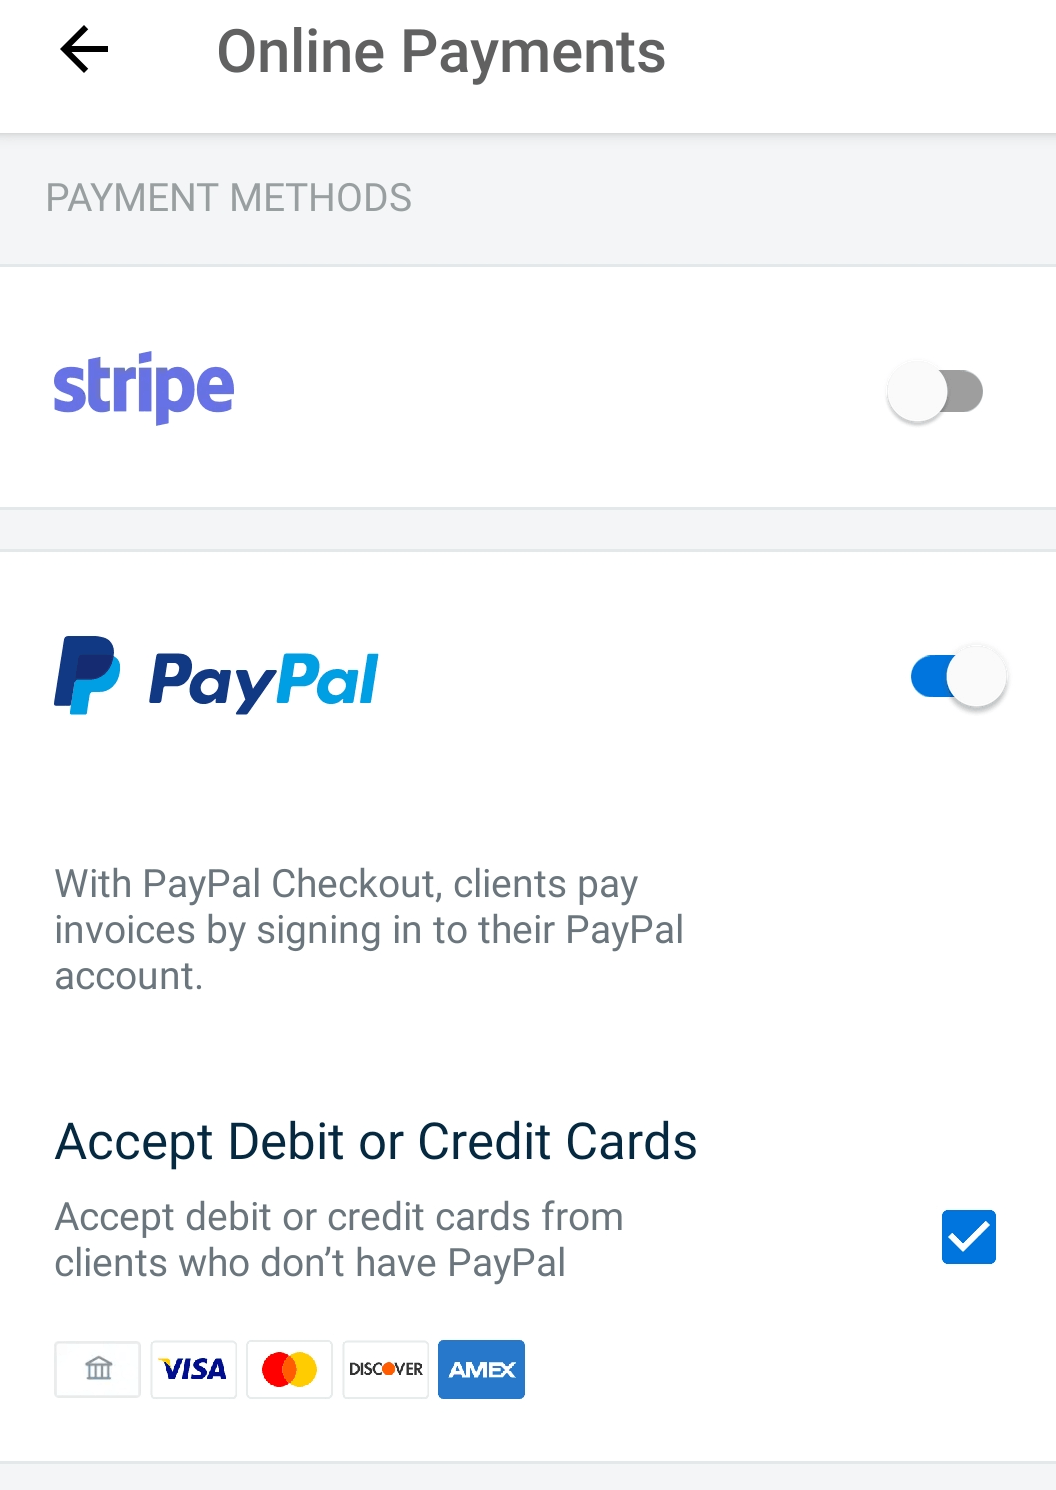 PayPal enabled with a checkbox for accept debit cards and credit cards enabled.